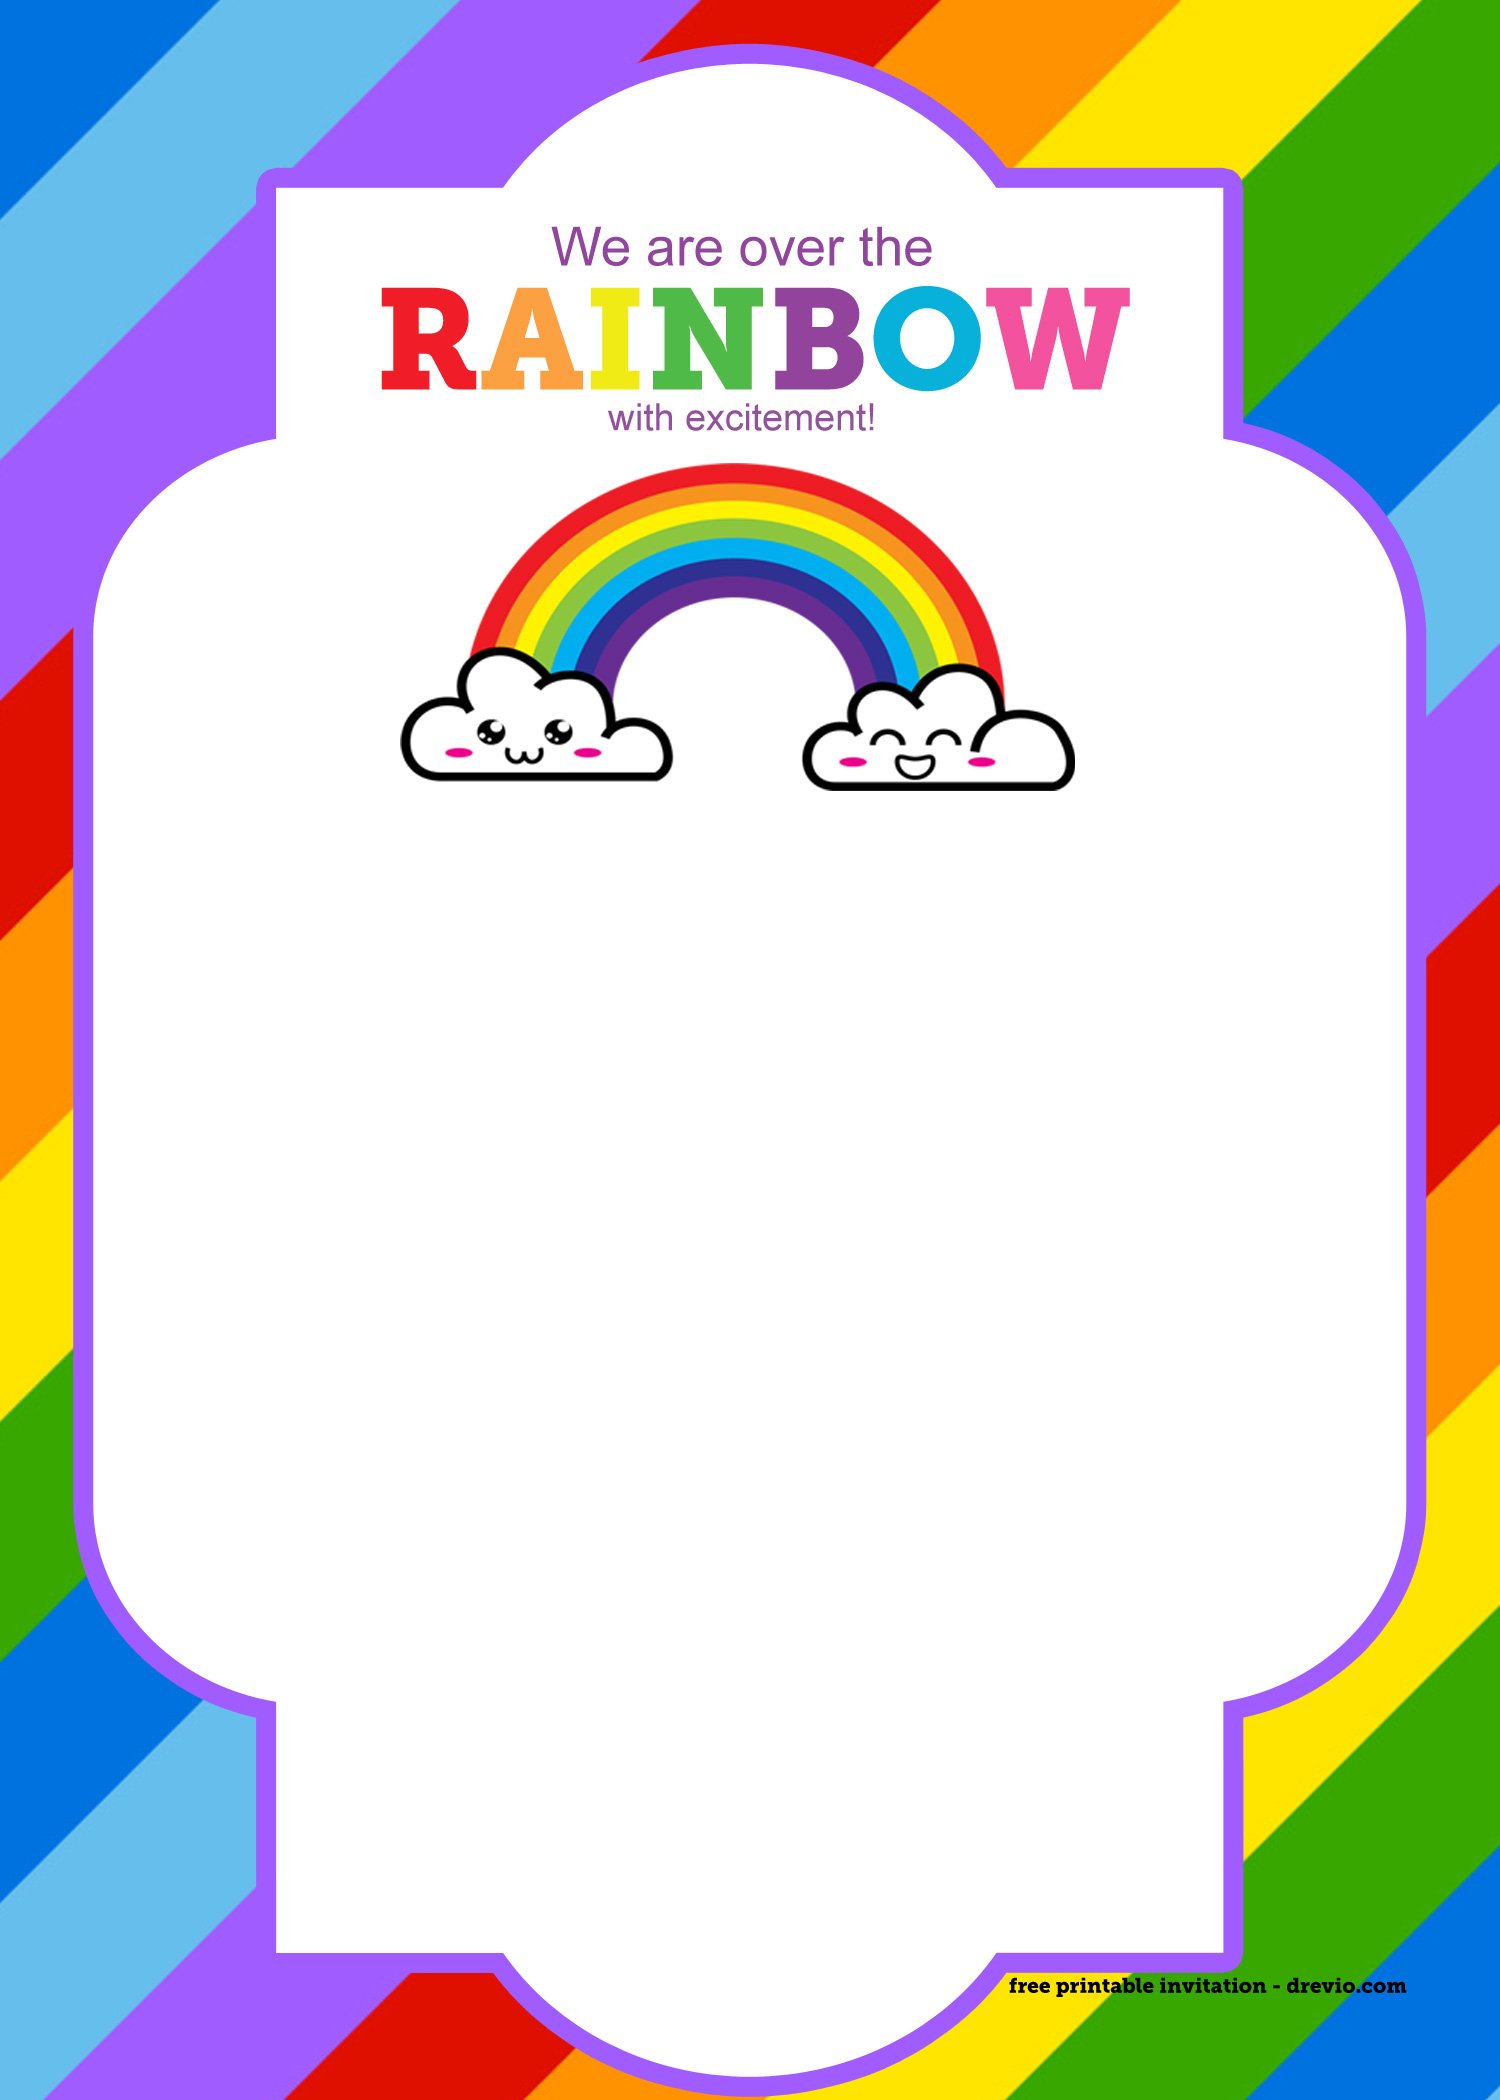 FREE Printable Rainbow Invitation Template + Thank You Card Download